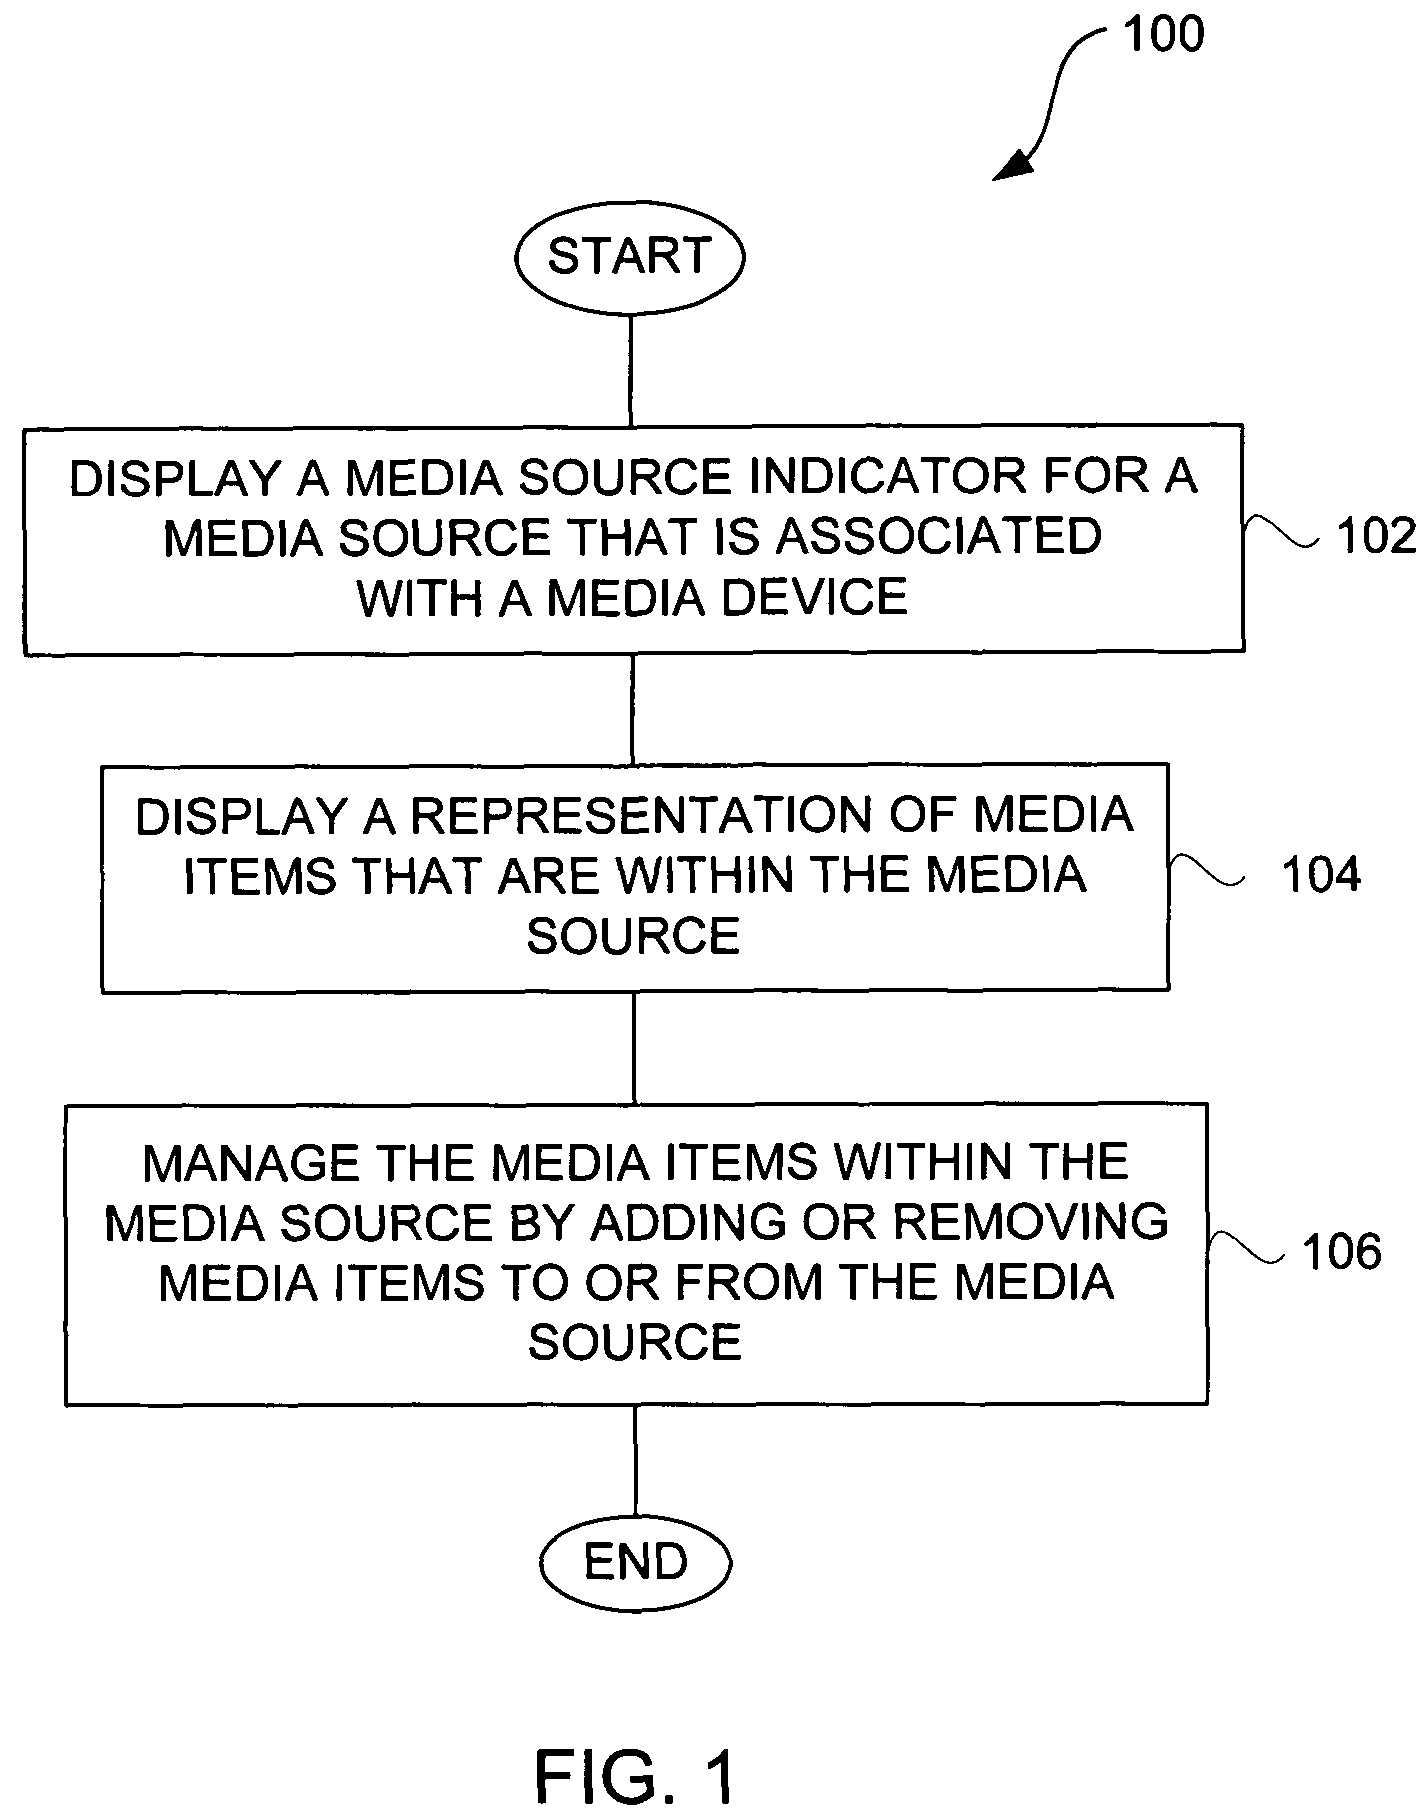 Media management for groups of media items